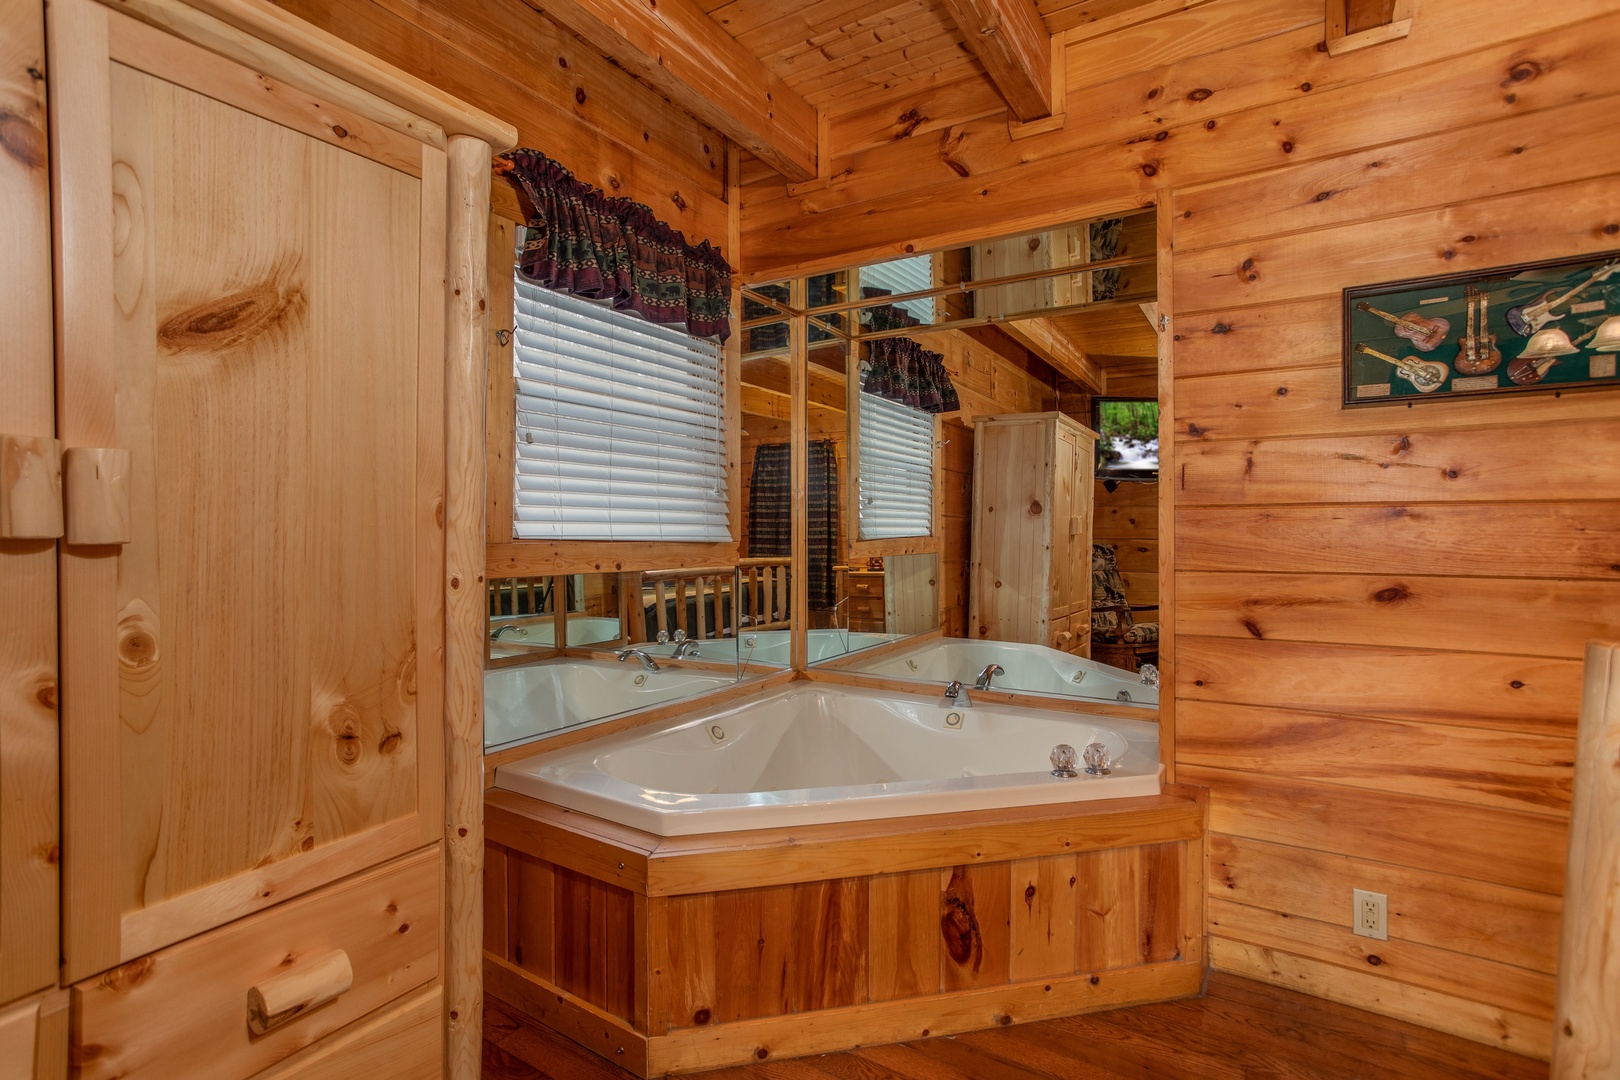 Jacuzzi in a bedroom at Mountain Music, a 5 bedroom cabin rental located in Pigeon Forge